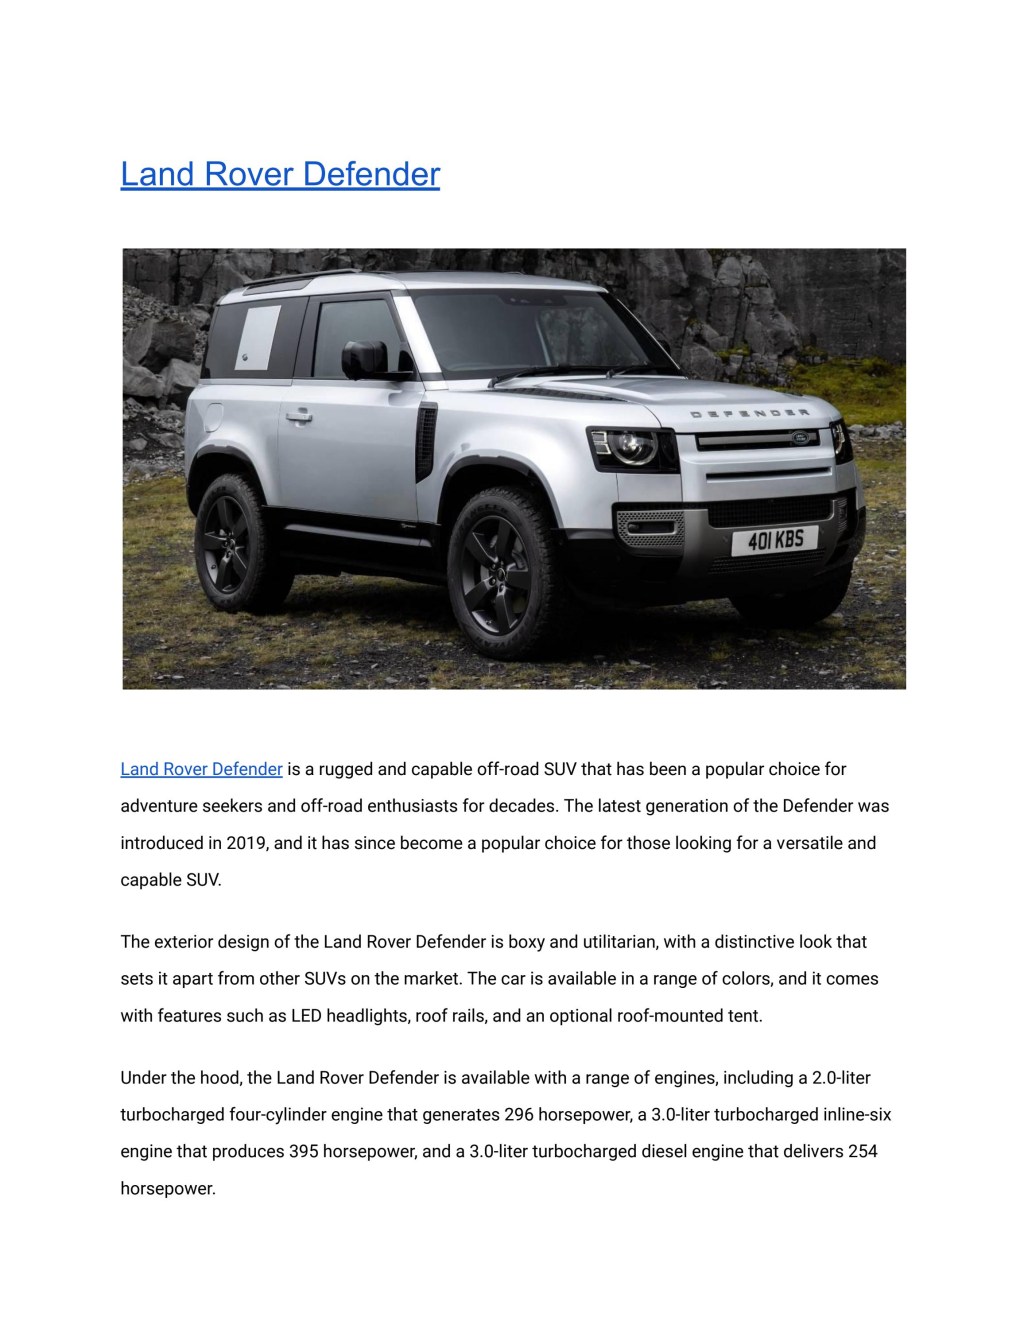 Picture of: Read Land Rover Defender News  ! by cmv – Issuu